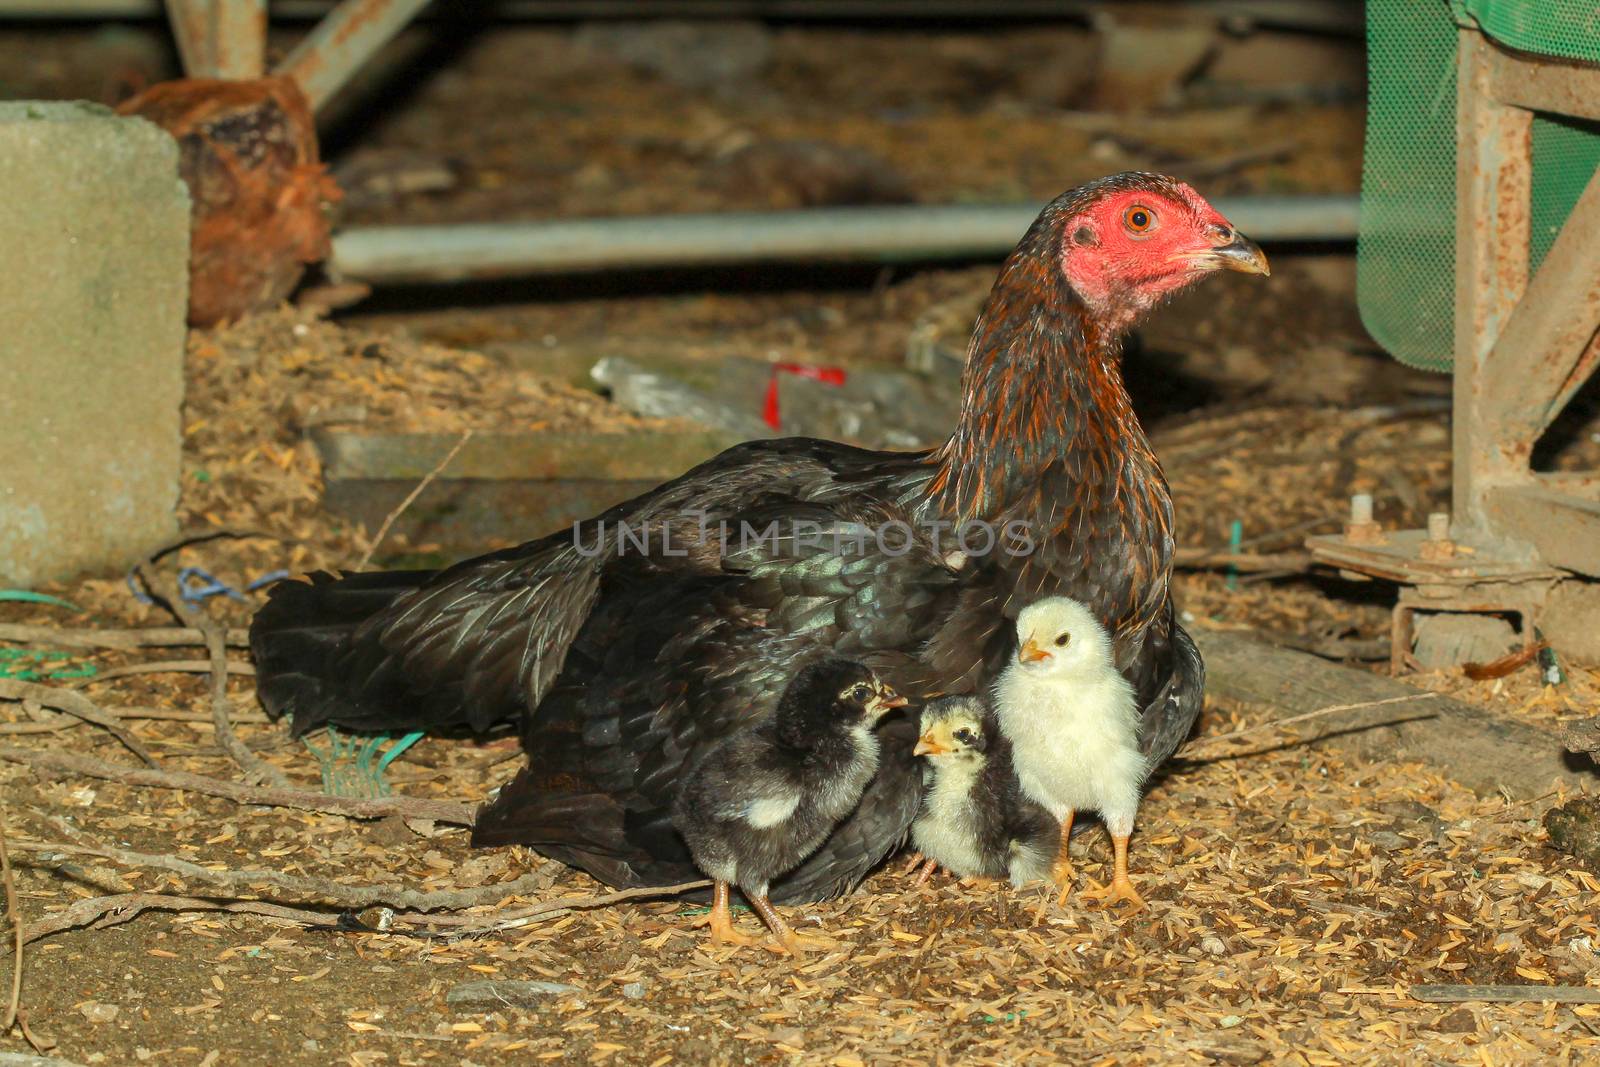 Hen fighting cock raising baby chick by pumppump